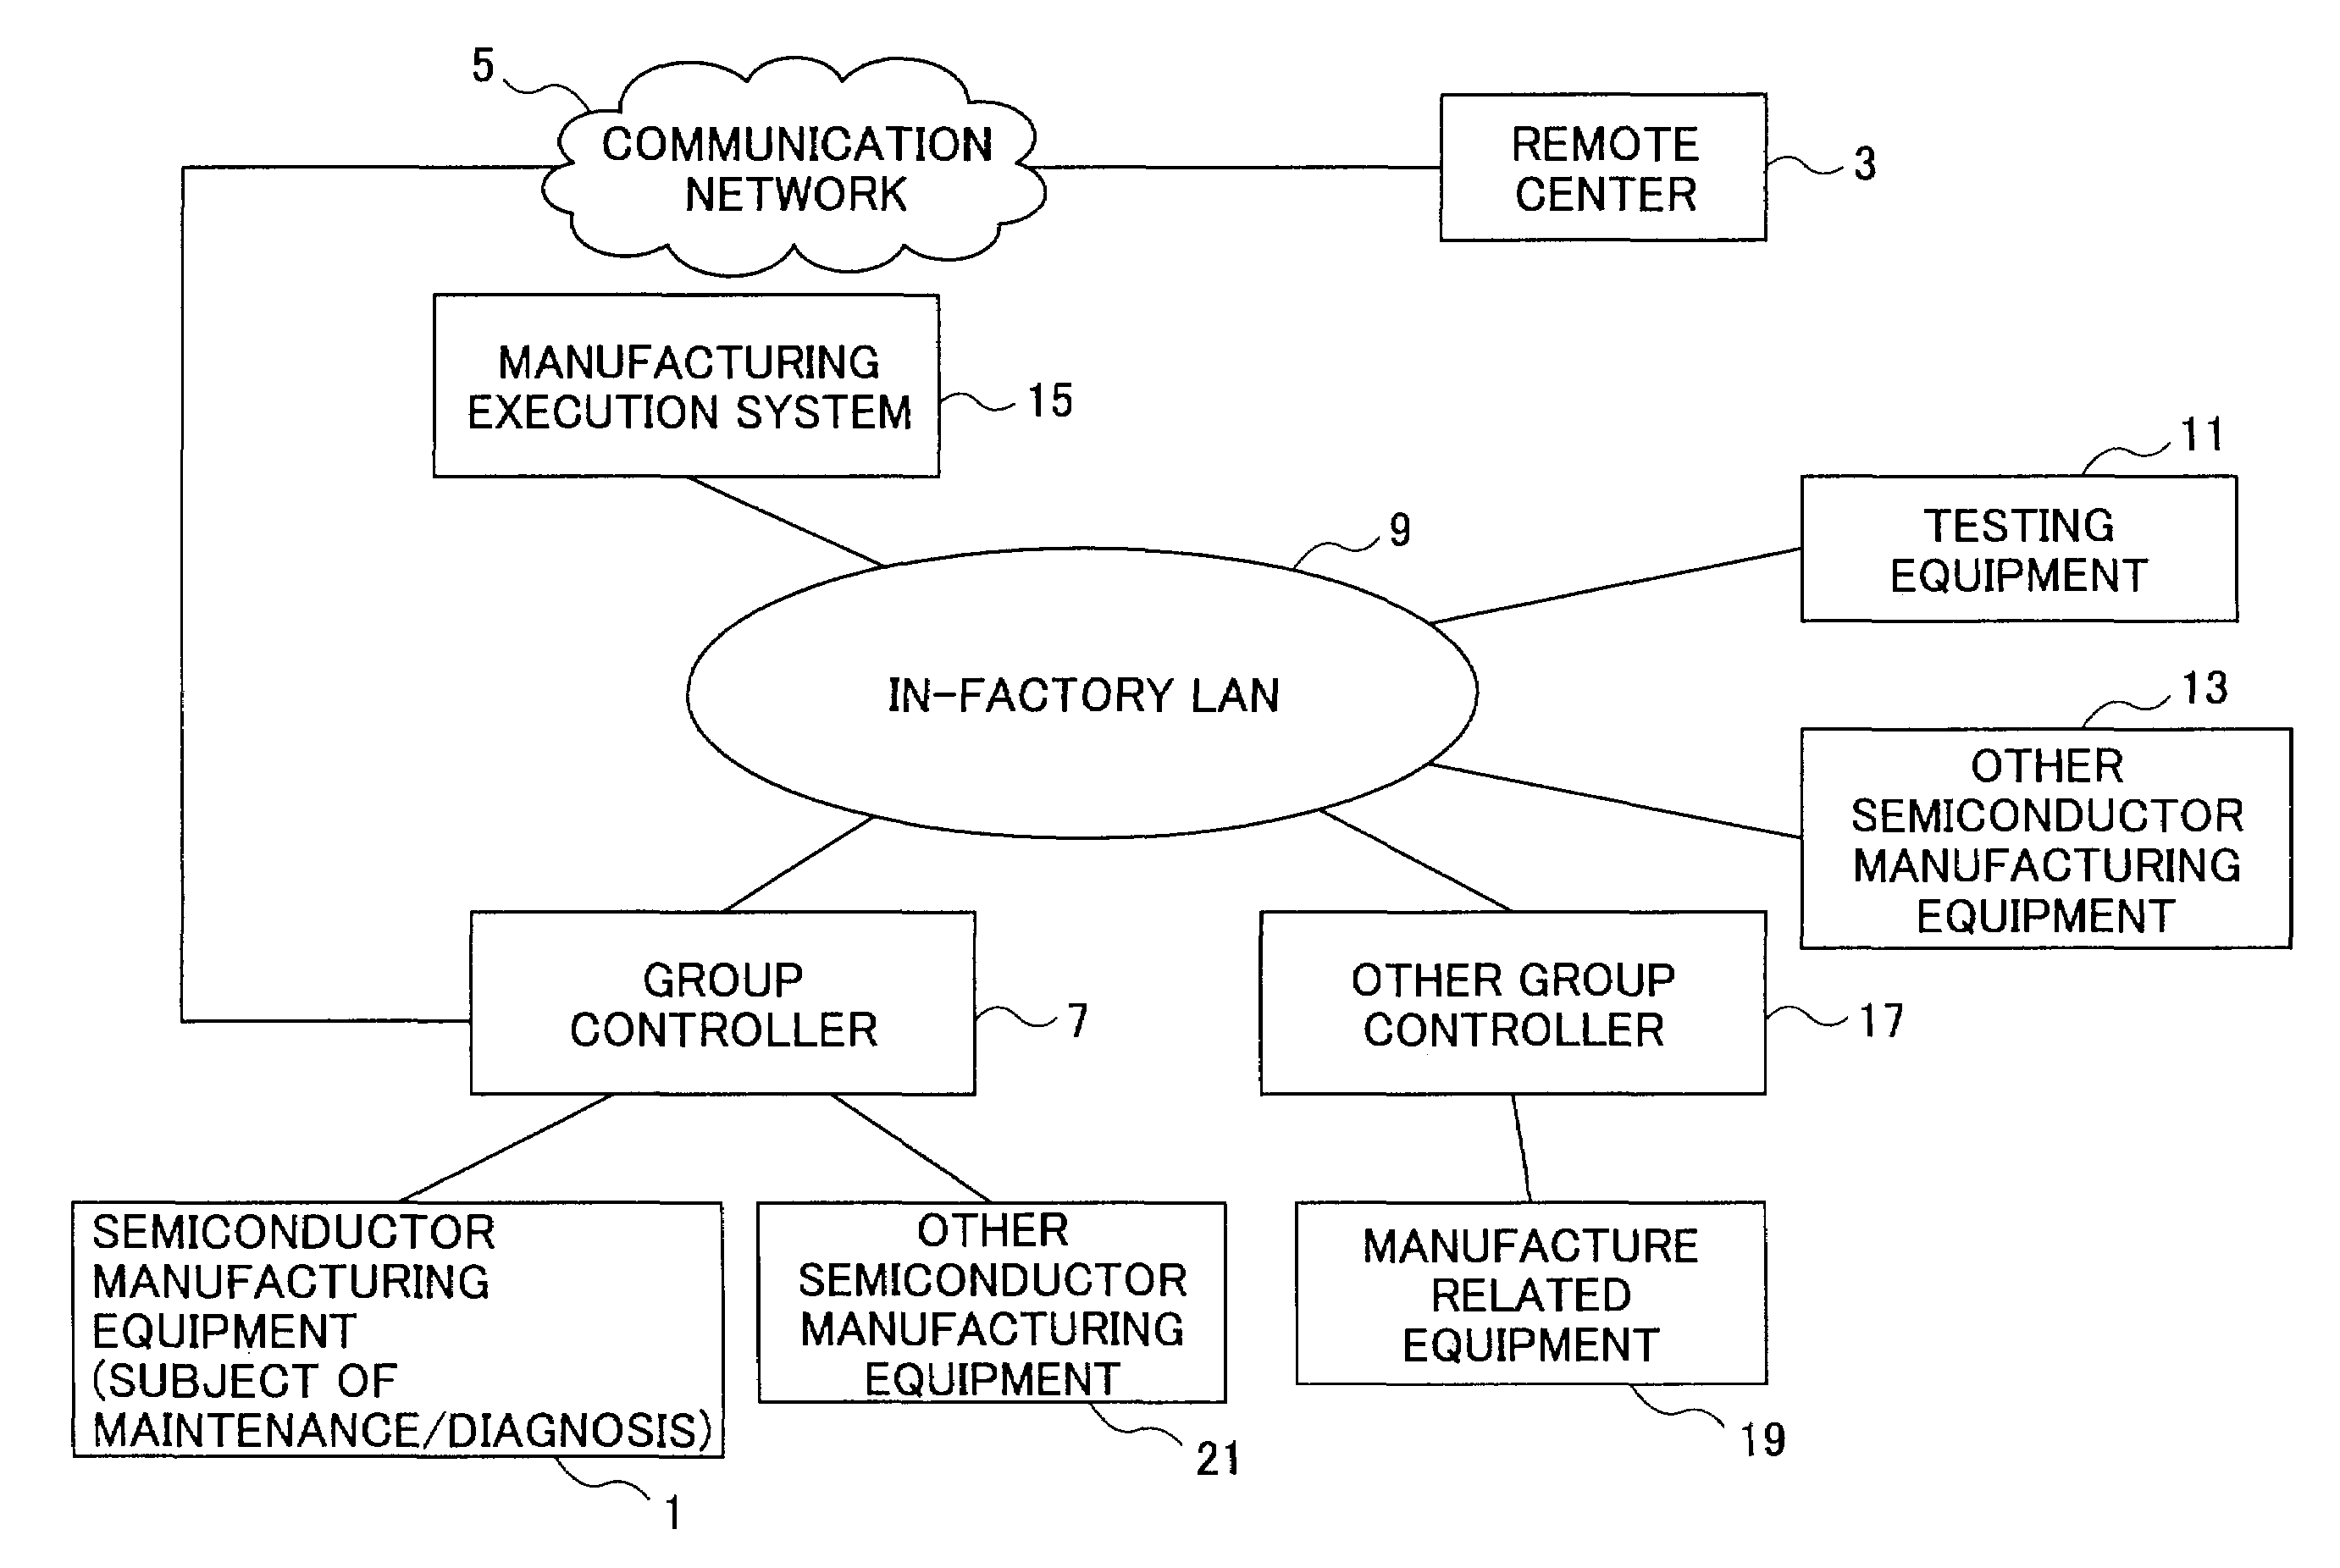 Method for collecting remote maintenance and diagnostic data from subject equipment, other device and manufacturing execution system